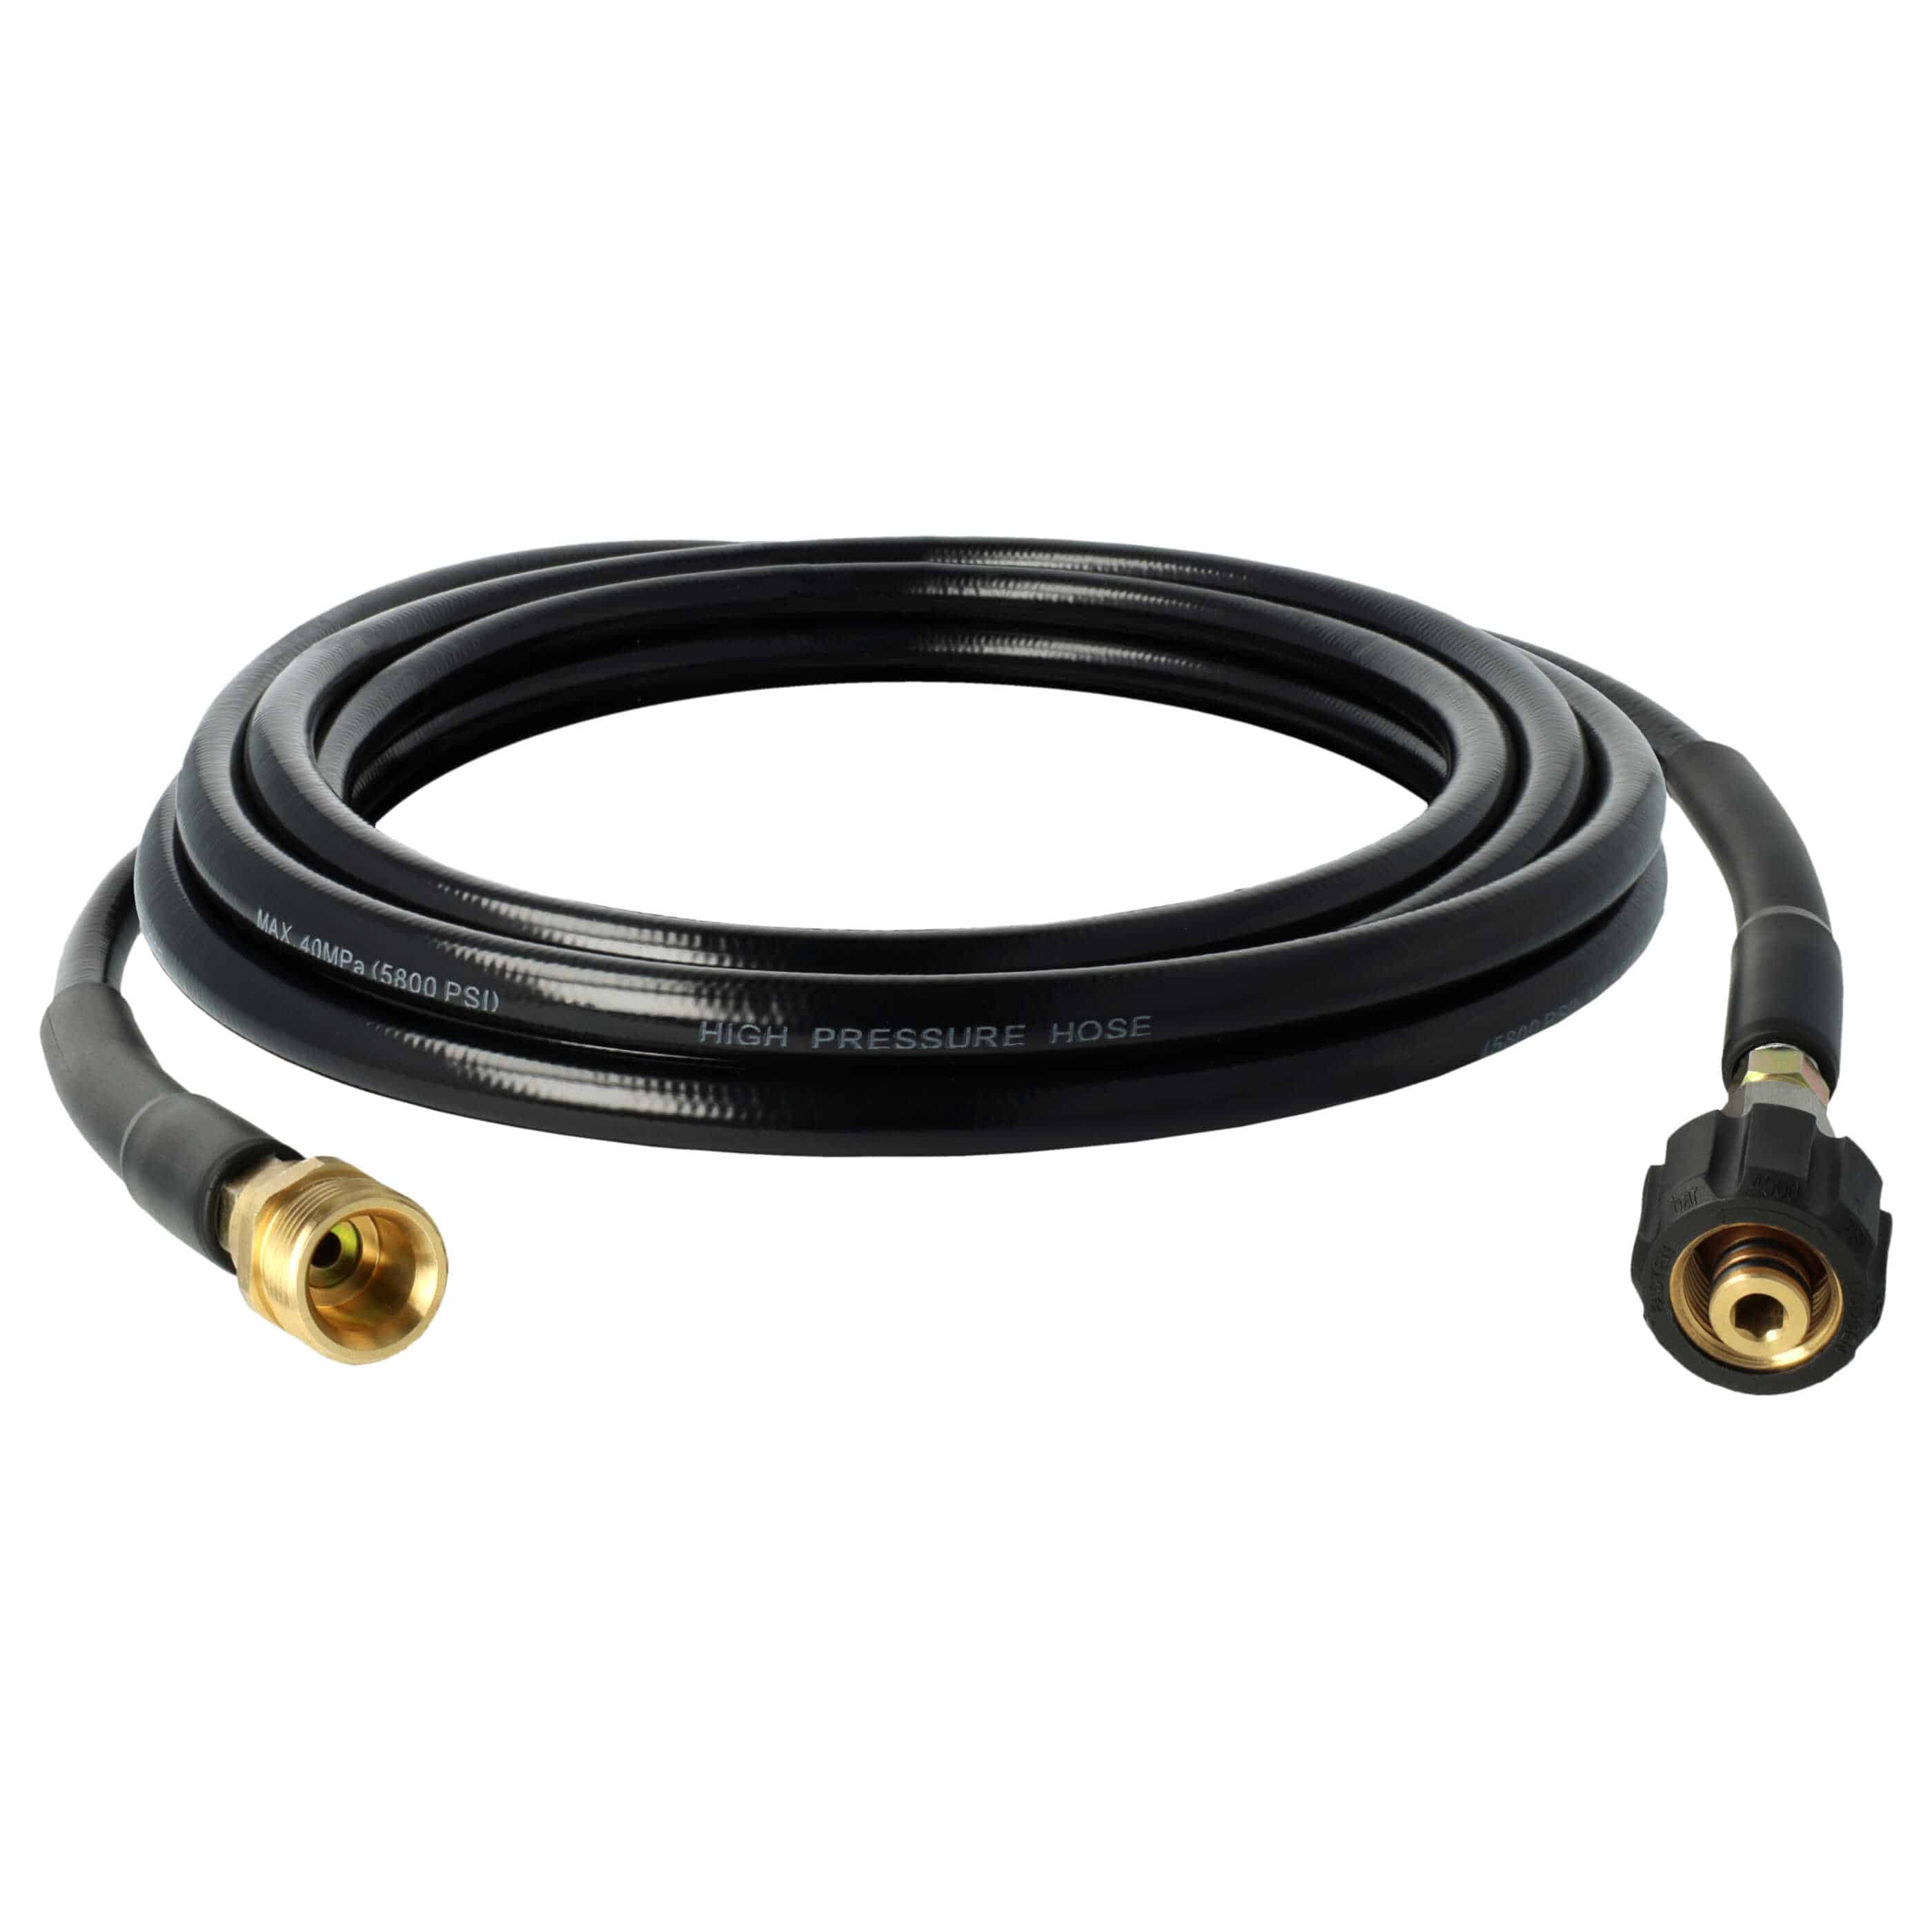 vhbw 5 m Extension Hose High-Pressure Cleaner with M22 x 1.5 Threaded Connection Black